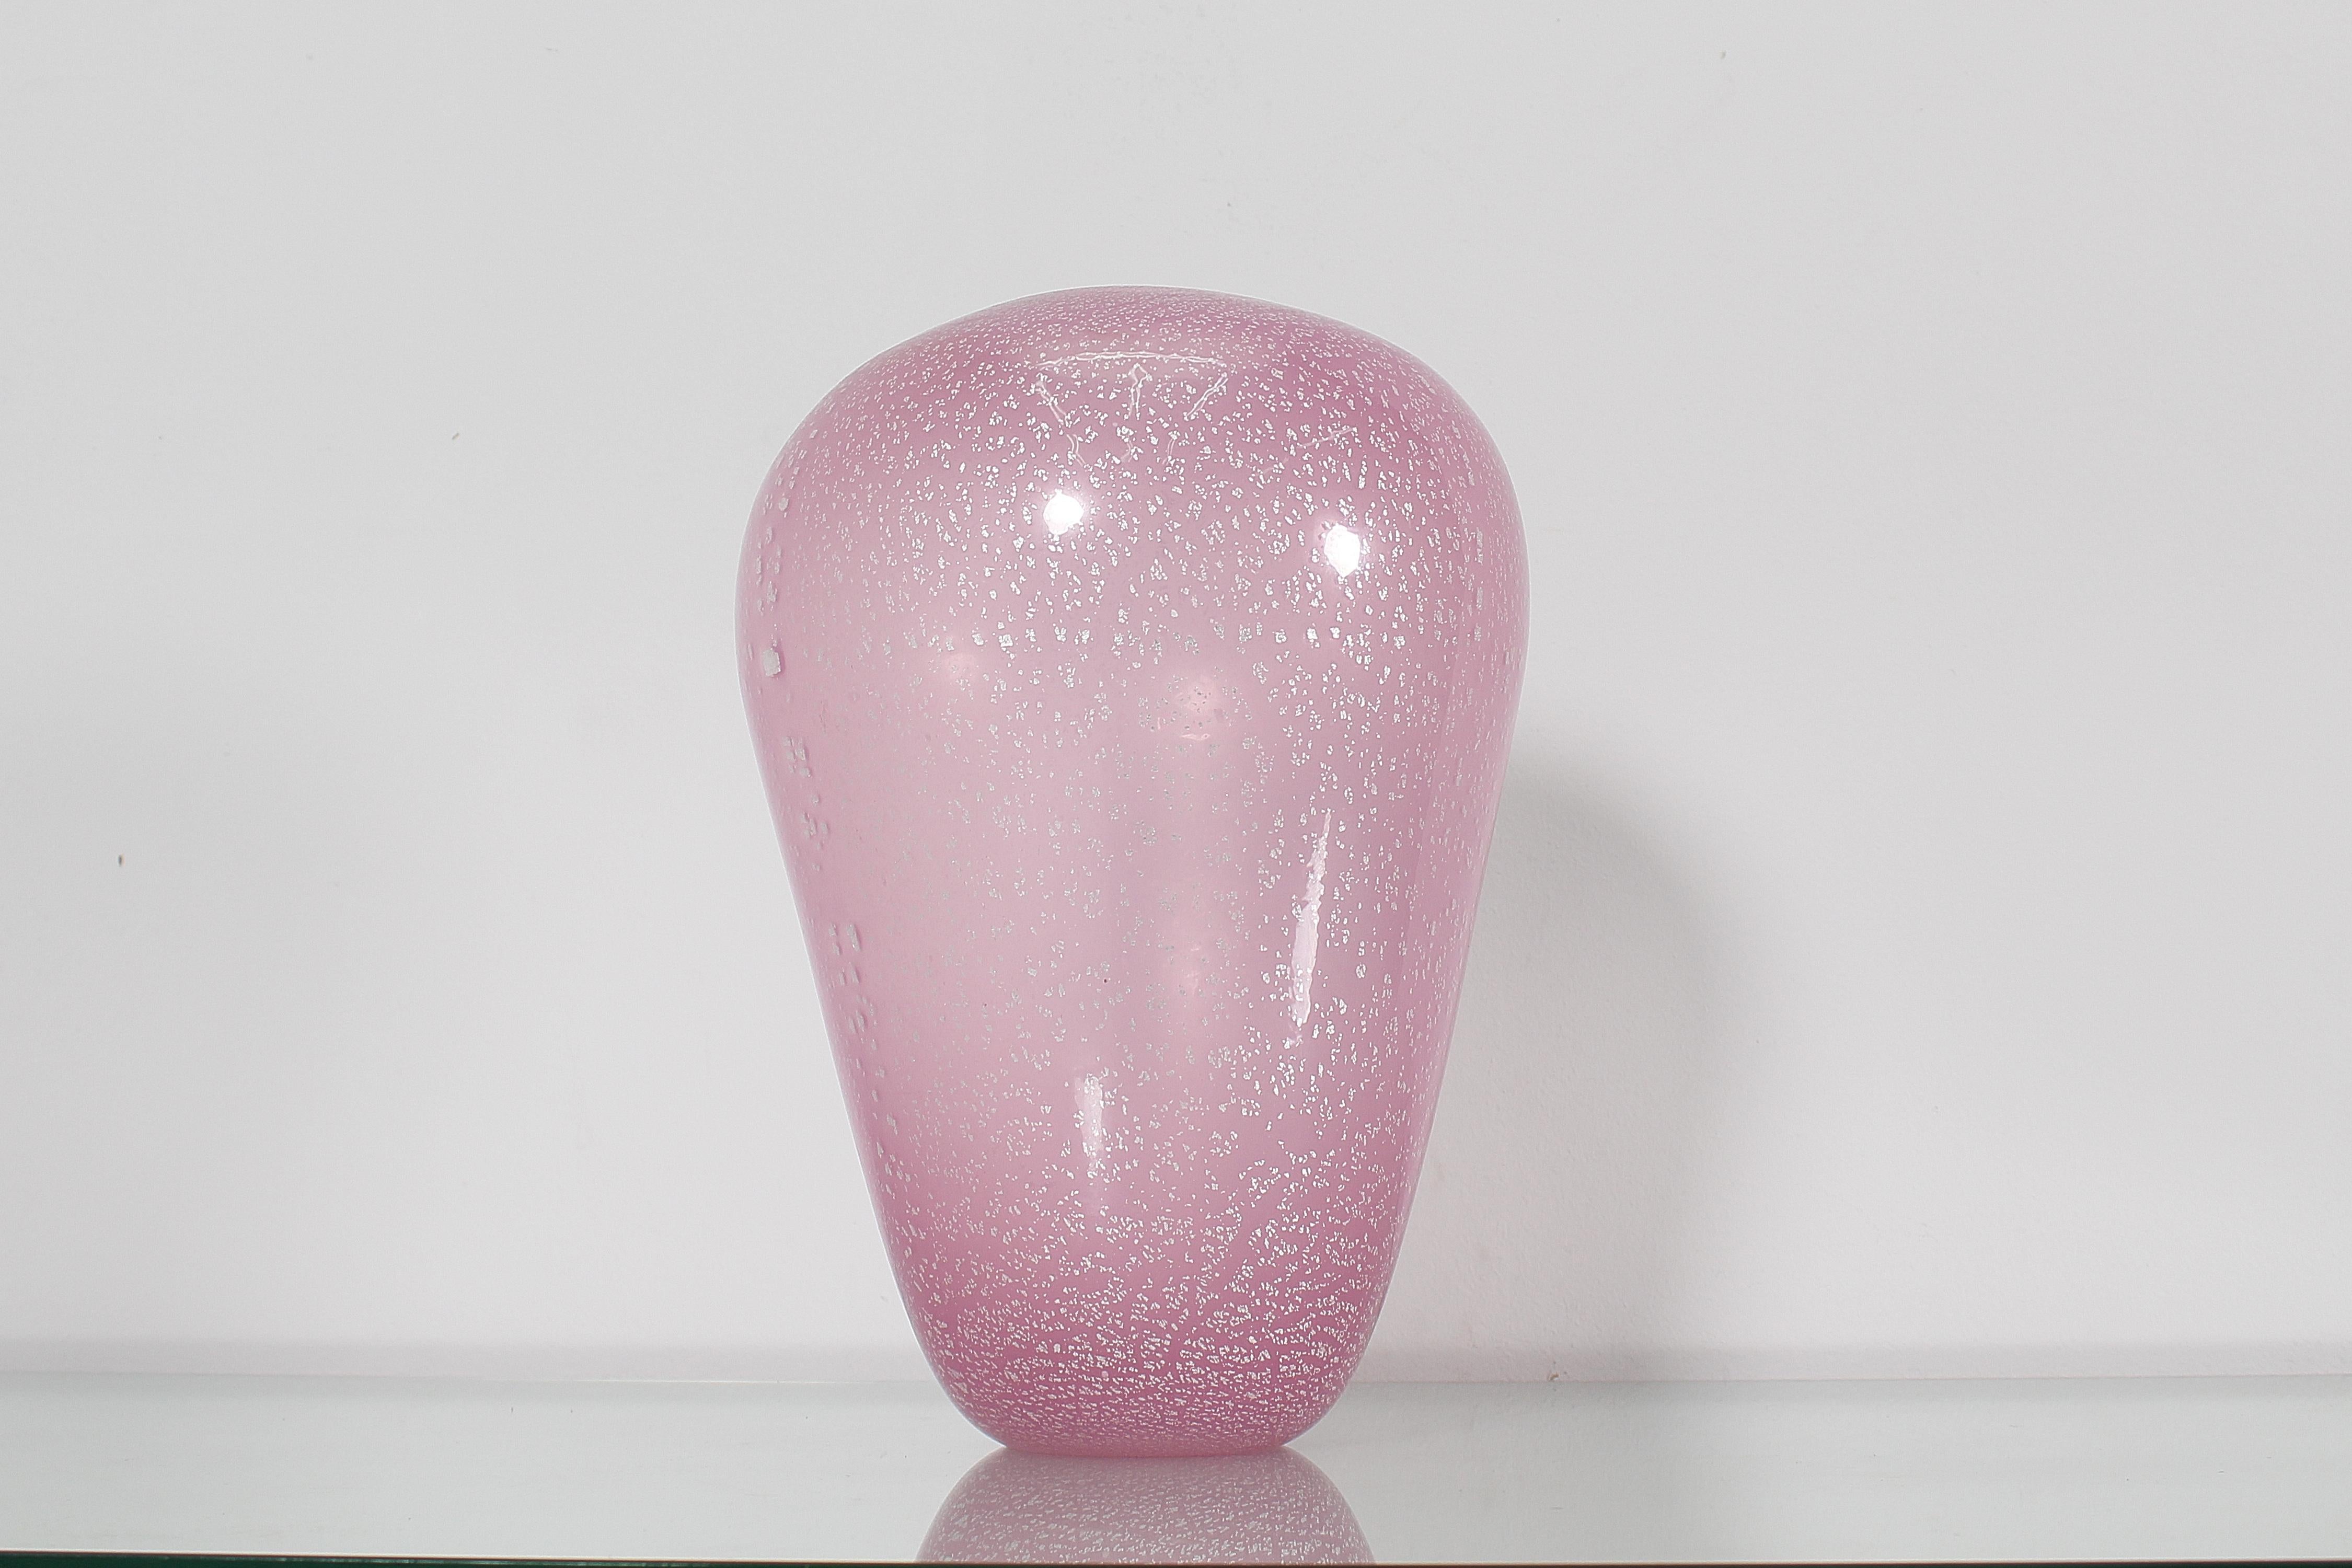 Mid-Century Modern Midcentury Barovier & Toso Pink Murano Glass Vase with Silver Leaf 70s Italy